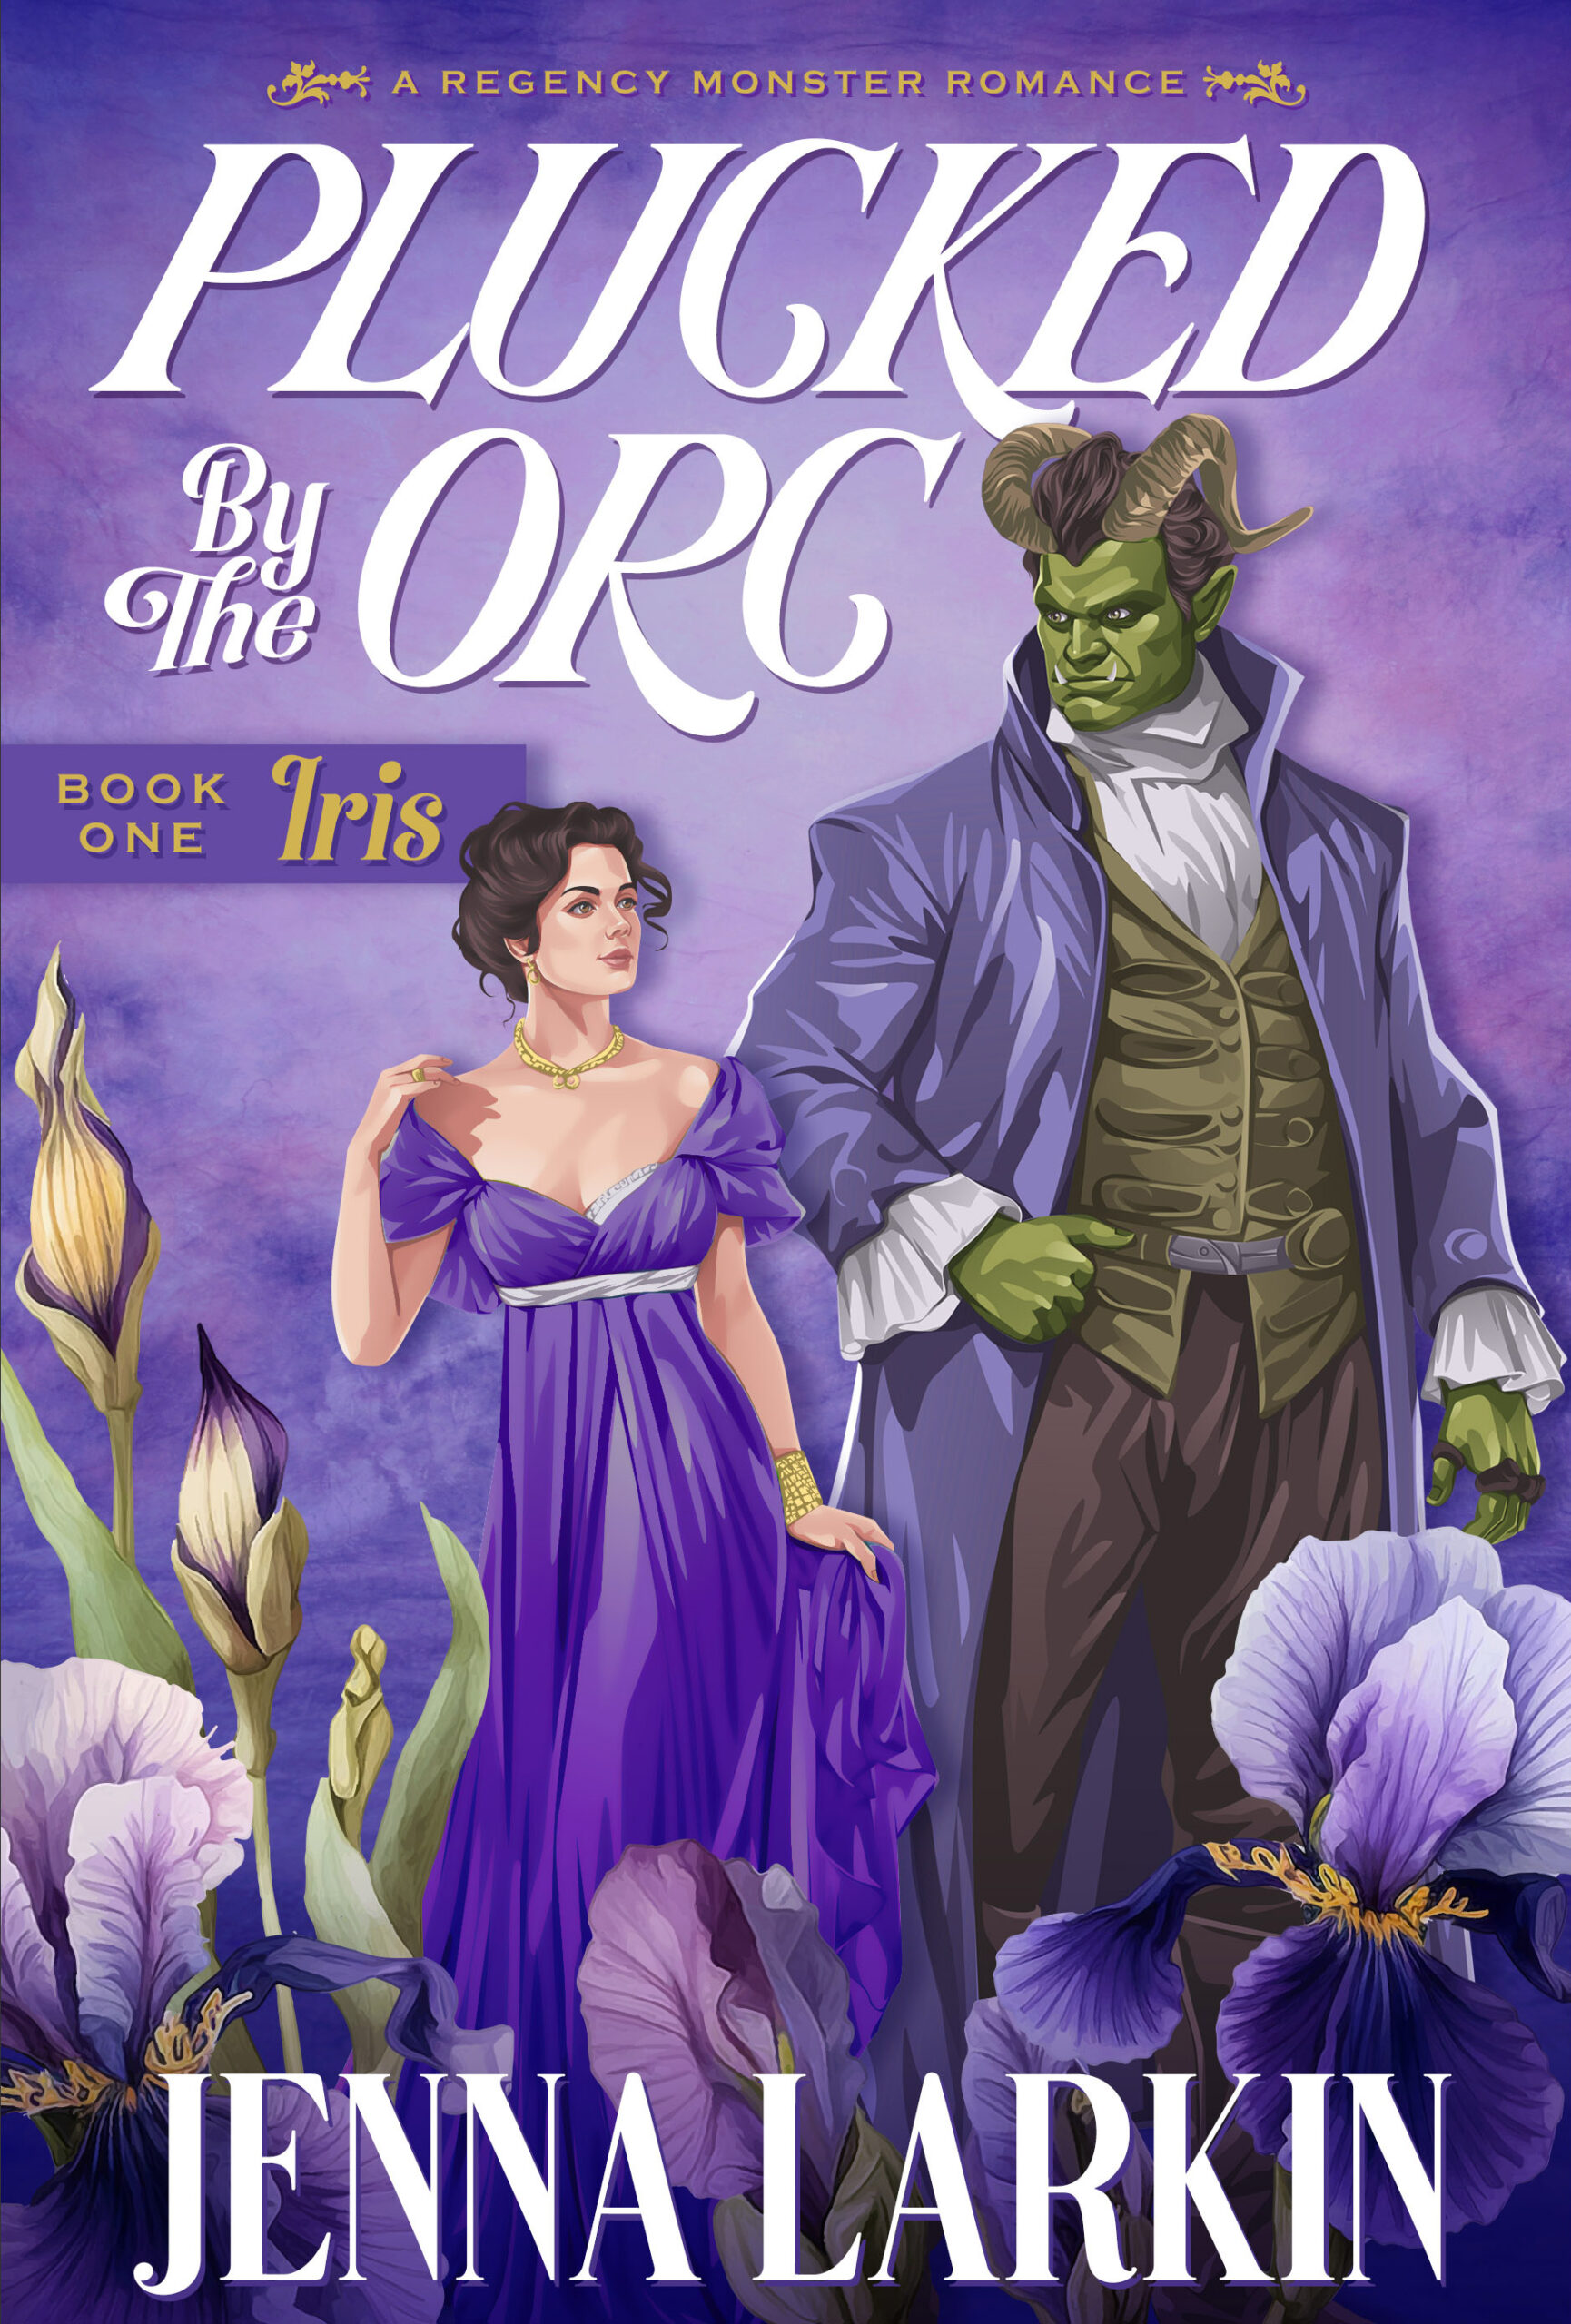 Book Blitz: Plucked By the Orc by Jenna Larkin